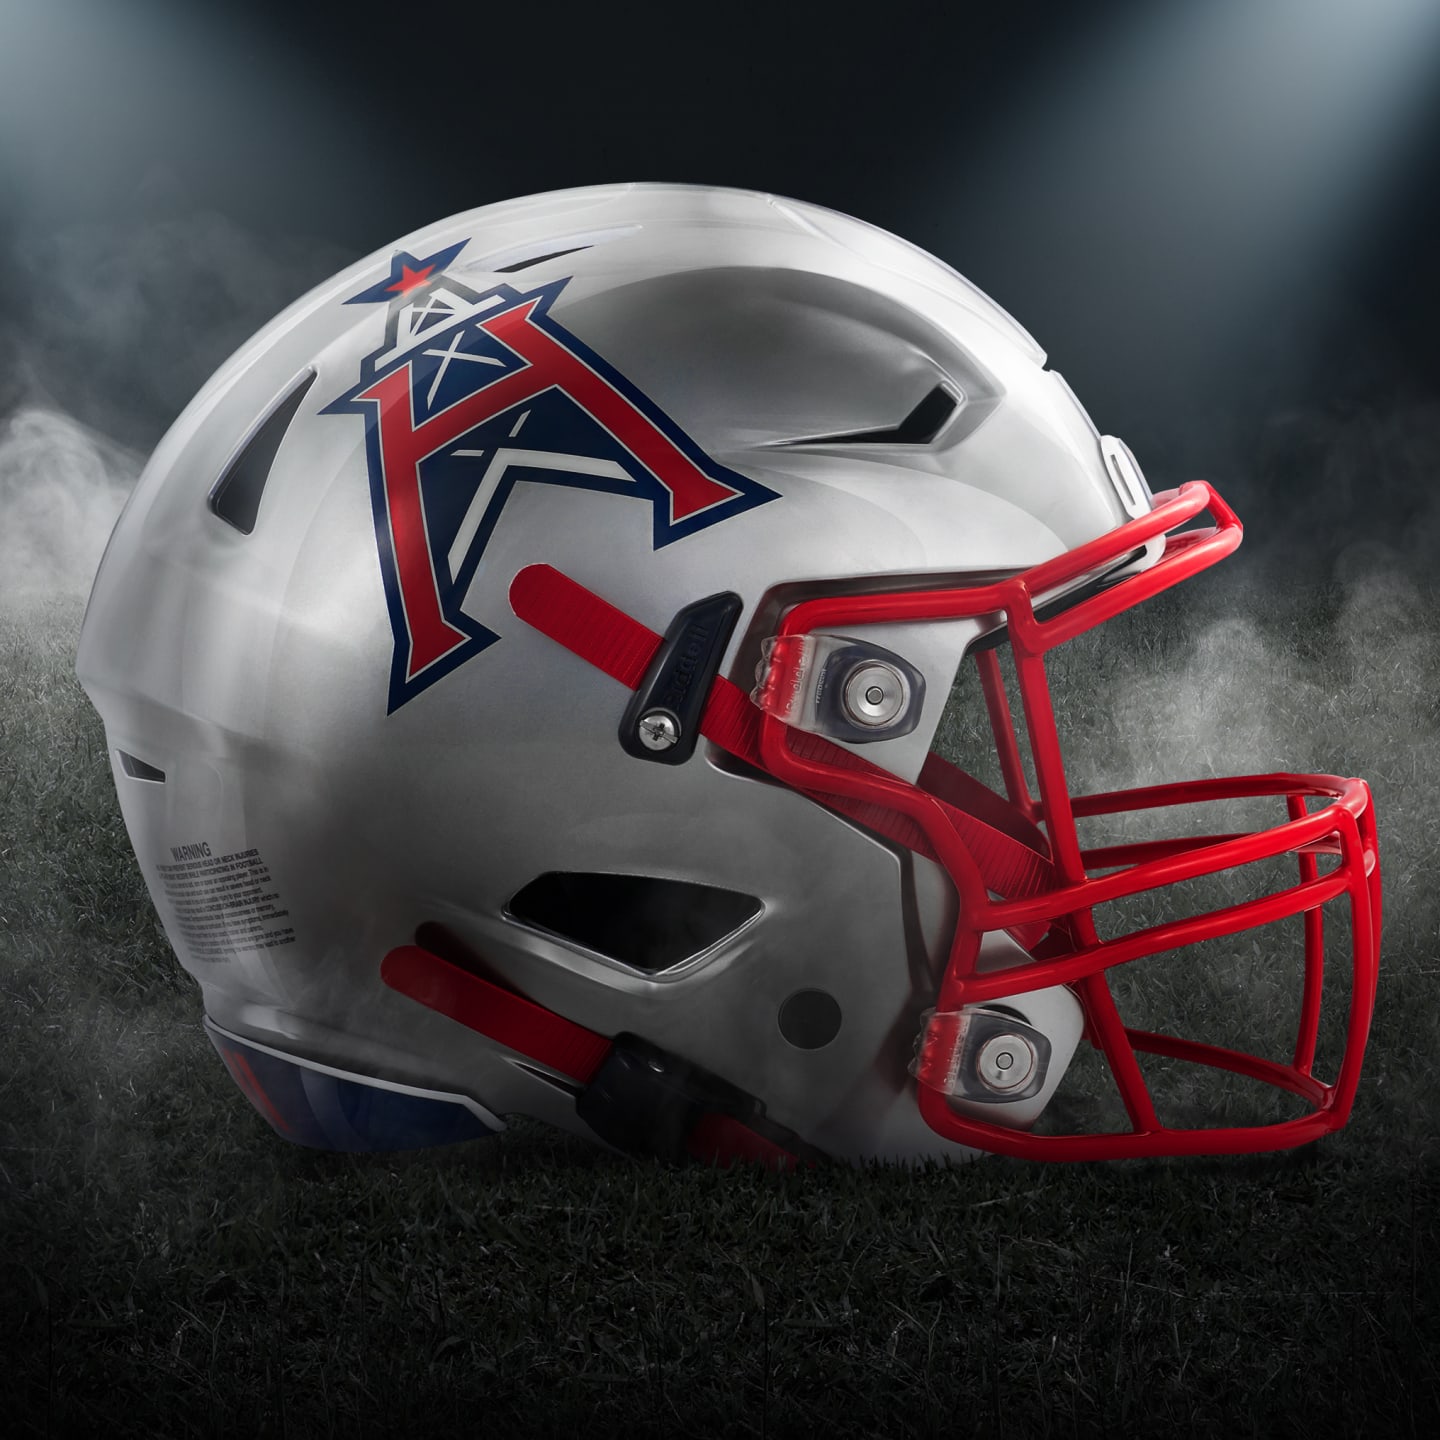 XFL uniforms 2023: Houston Roughnecks to suit up in Under Armour gear that  tips hat to Texas and oil industry - ABC13 Houston